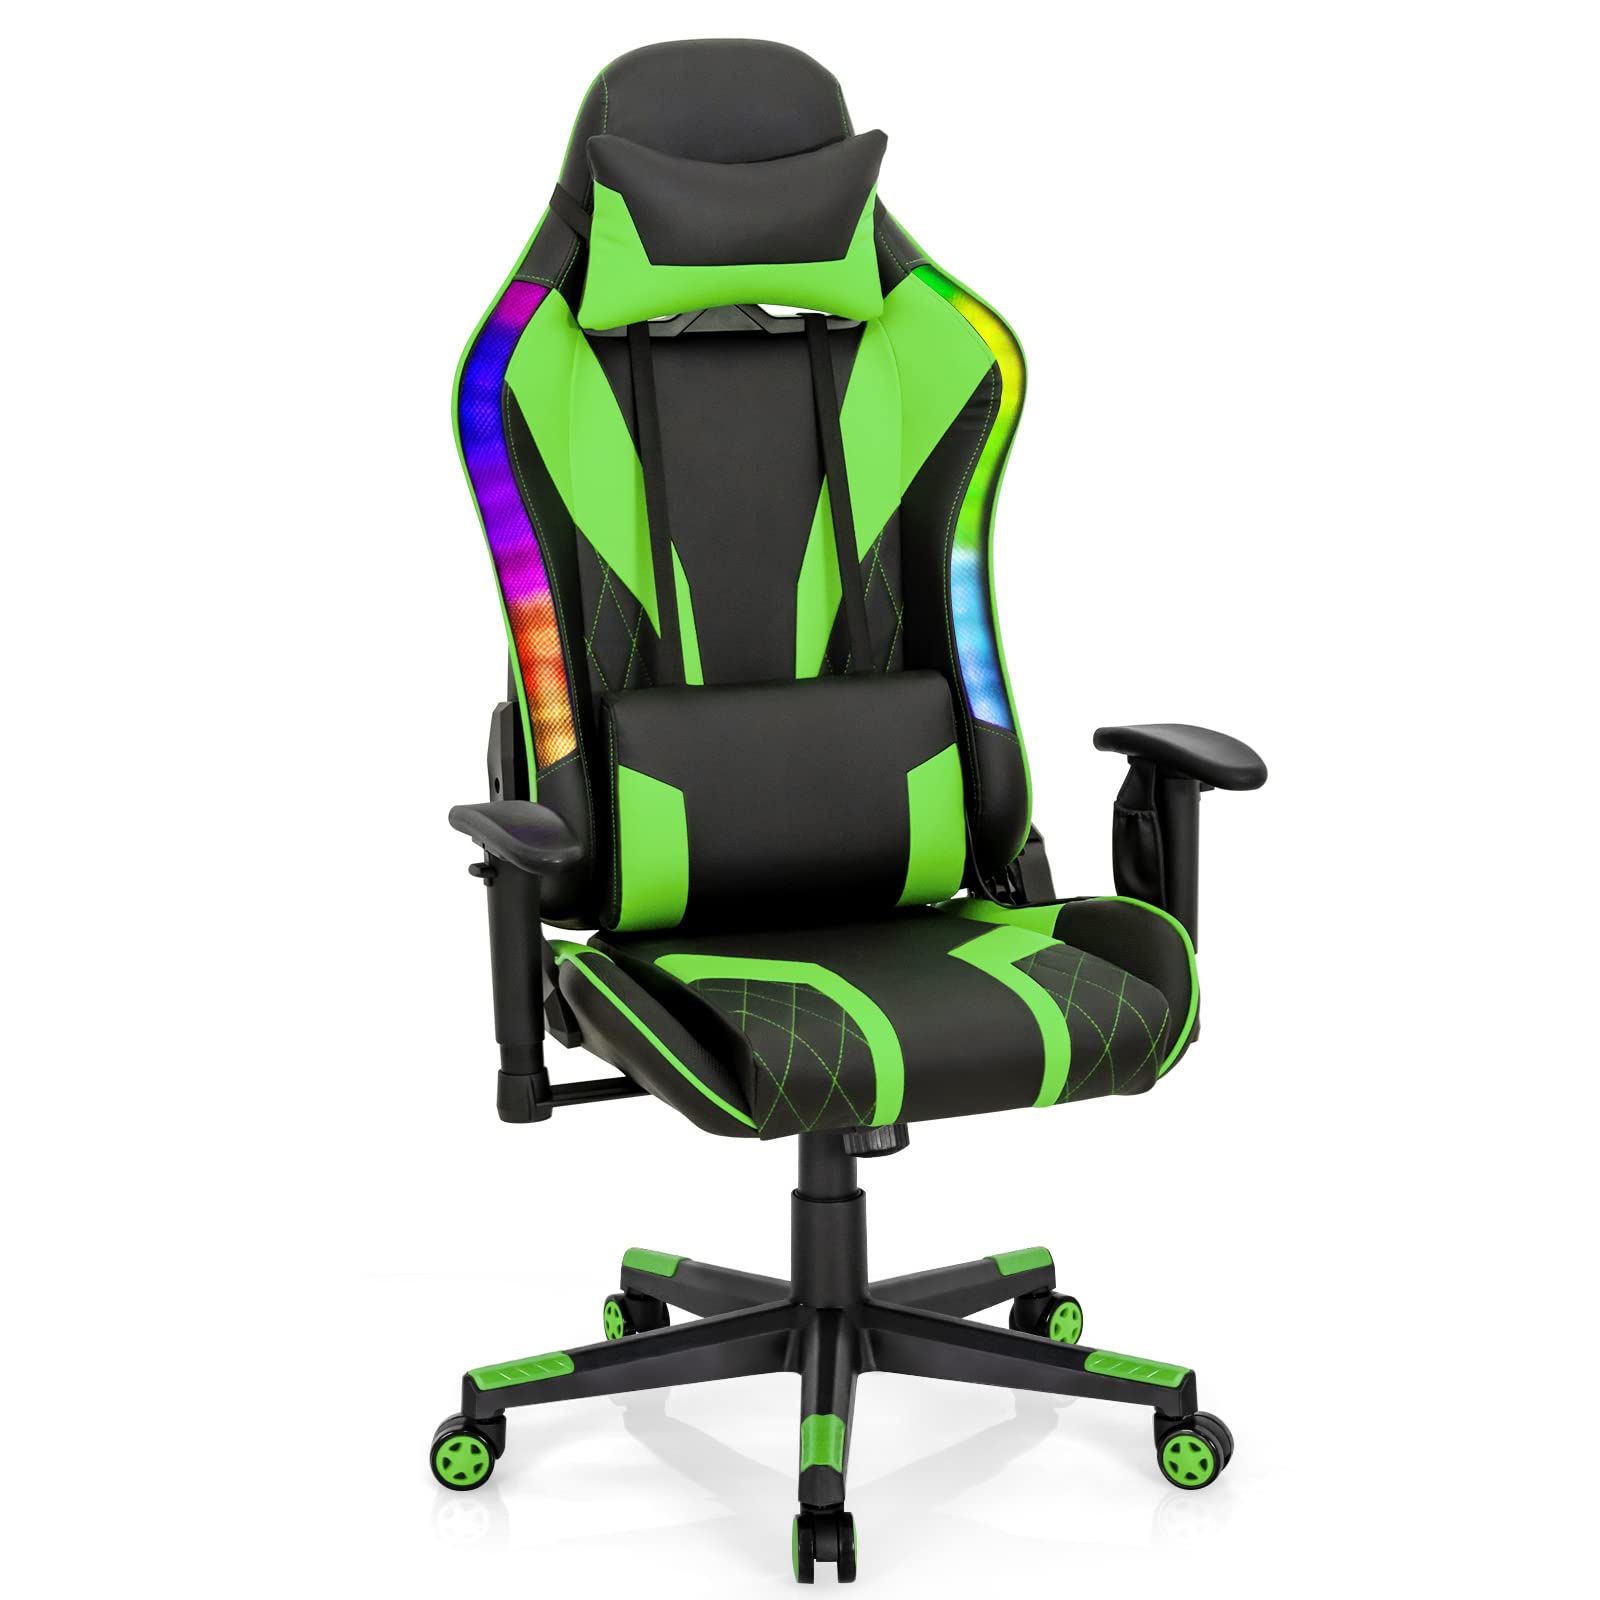 Giantex Gaming Chair with RGB LED Lights, Green